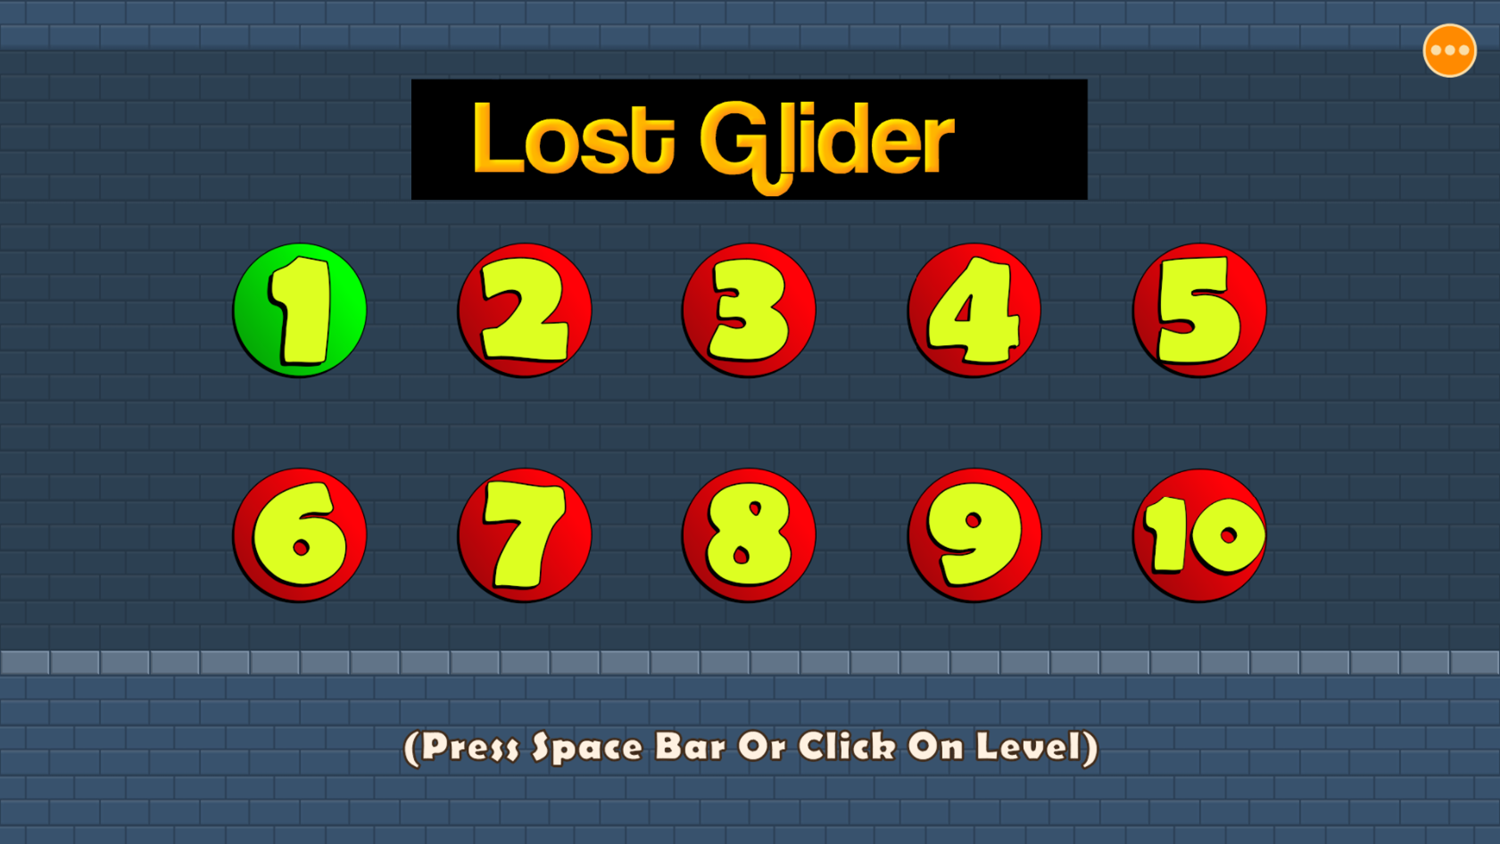 Lost Glider Game Level Select Screenshot.